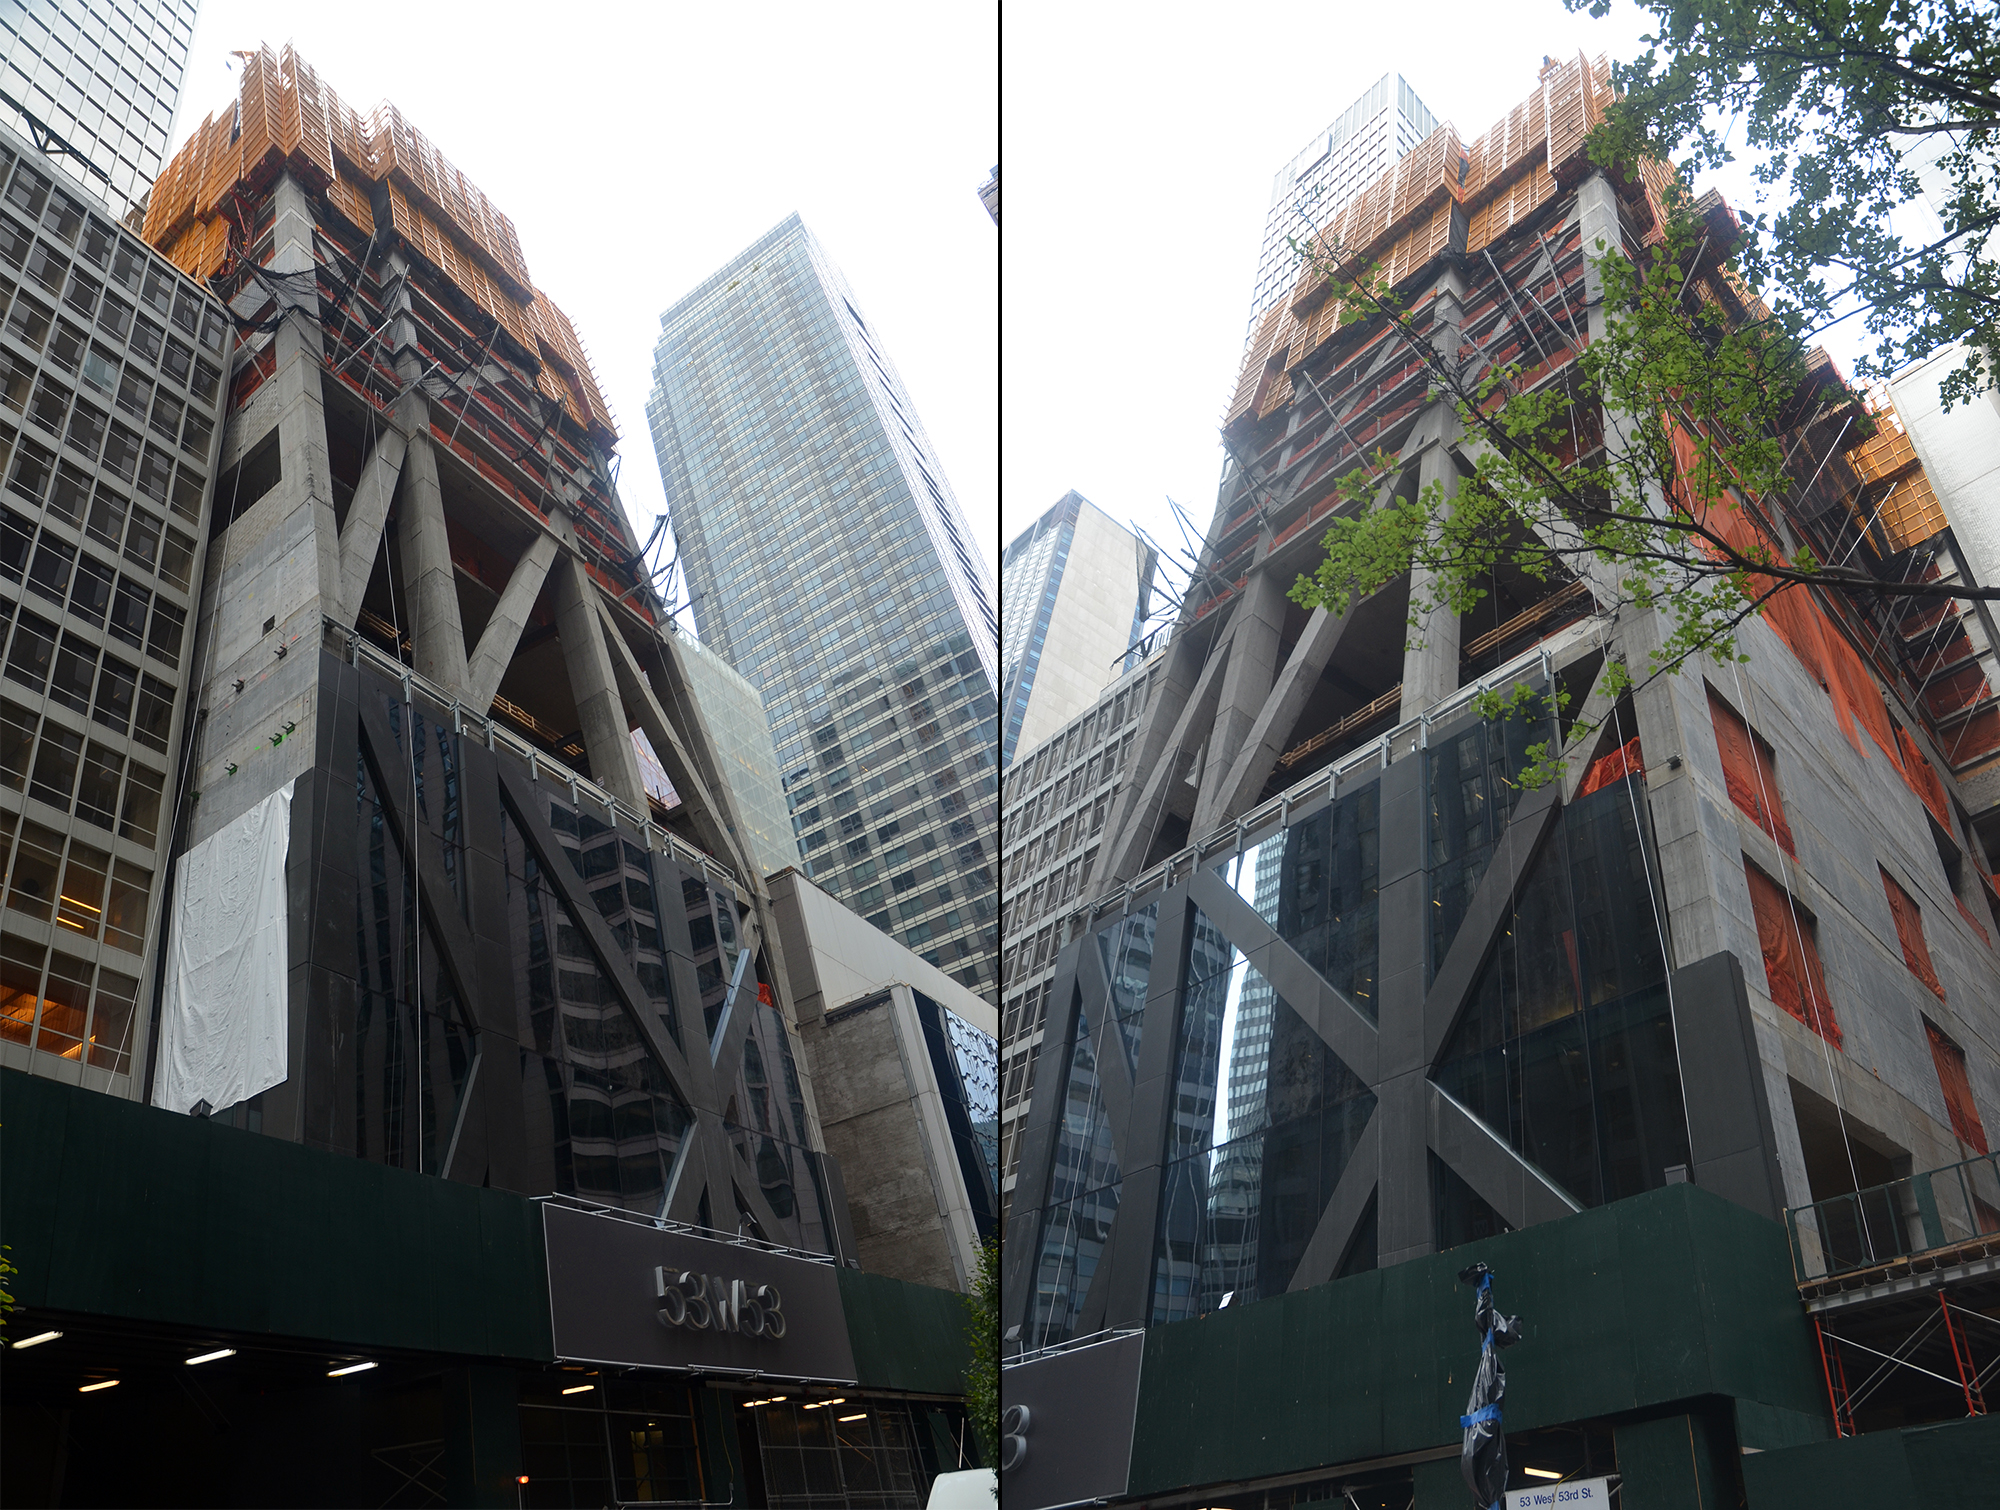 Construction on the 53rd Street side of 53W53. All photos by Evan Bindelglass unless noted